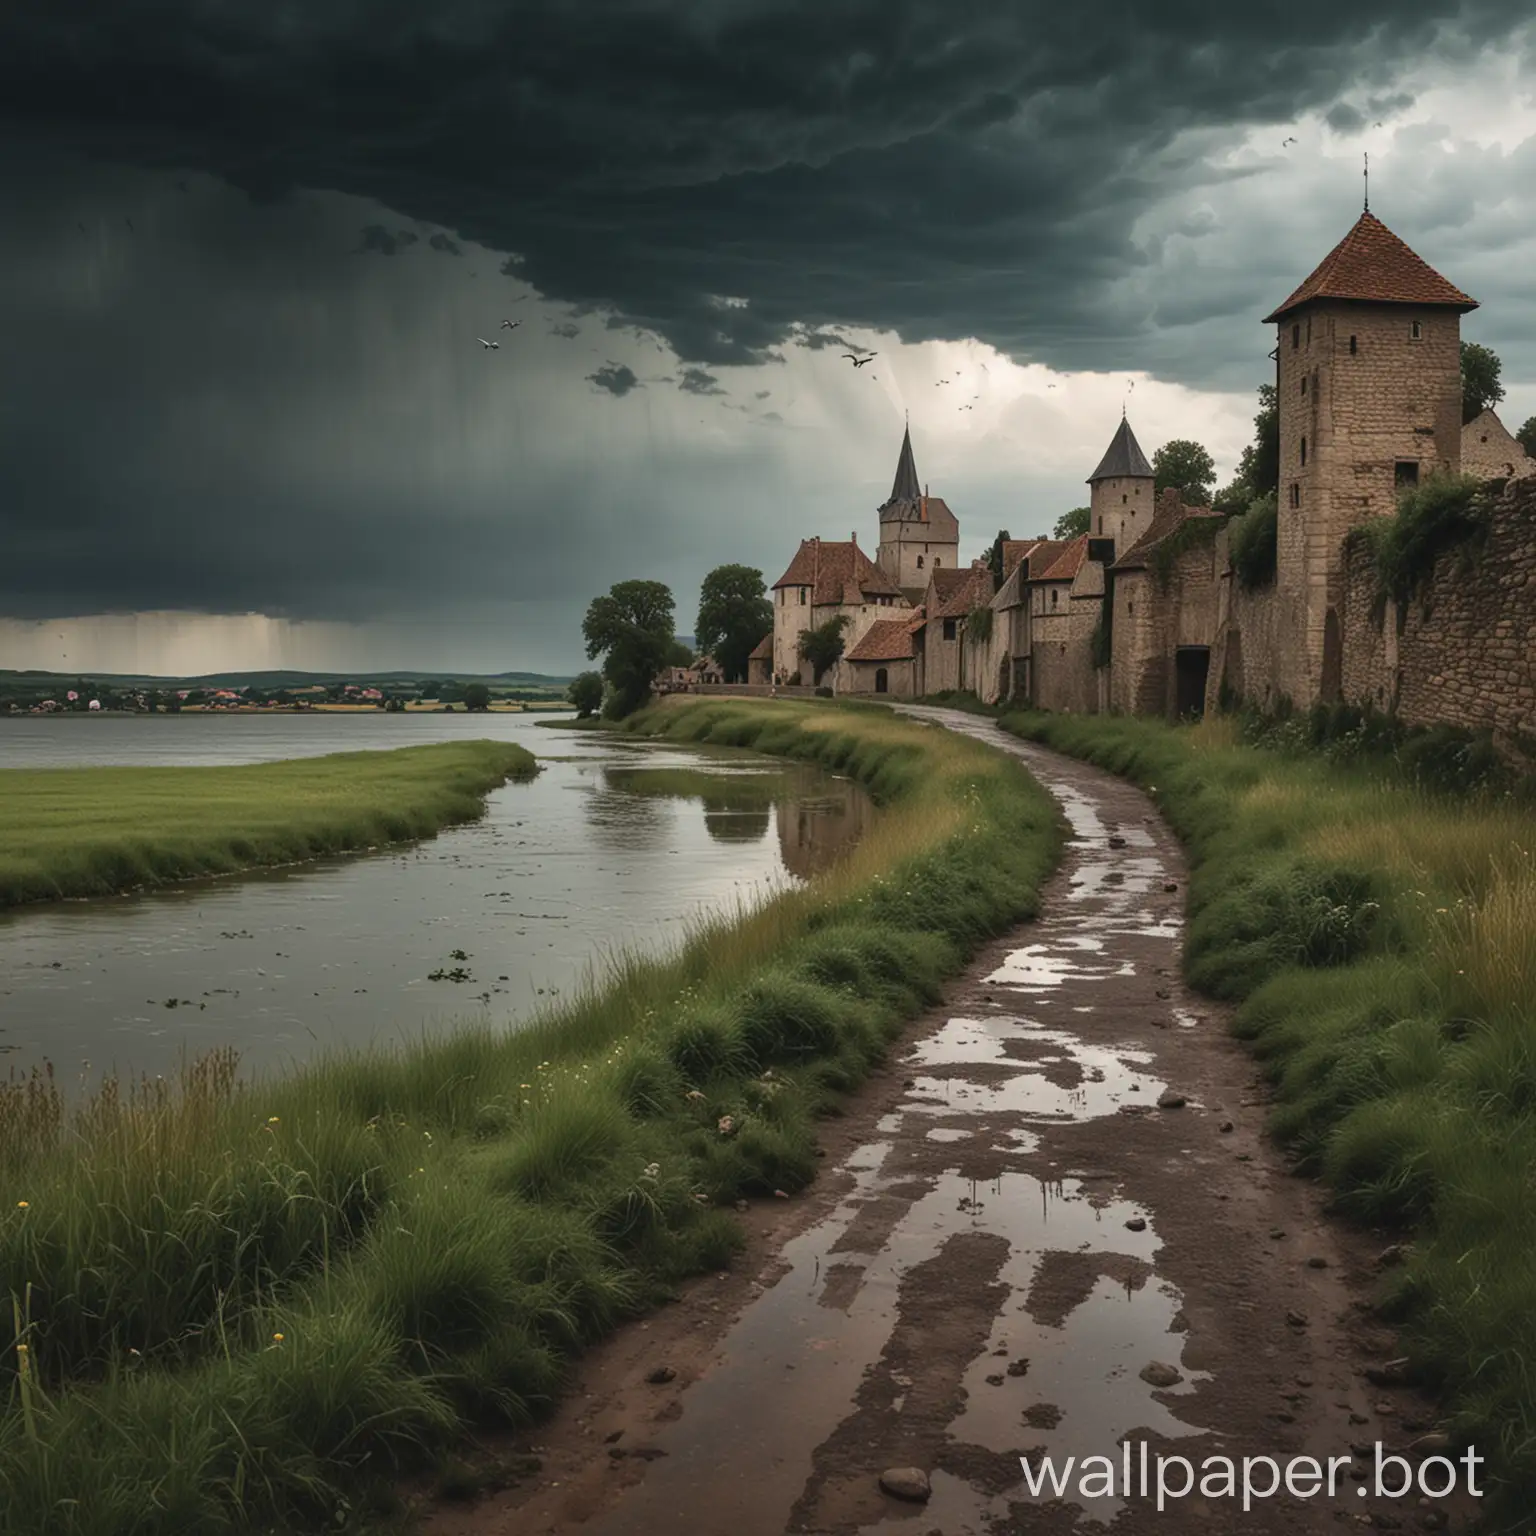 on a lake shore a walled medieval town surrounded by miles of fields, a road leaves it and stretches into the distance, some creatures fly in the back ground. a storm builds in the distance